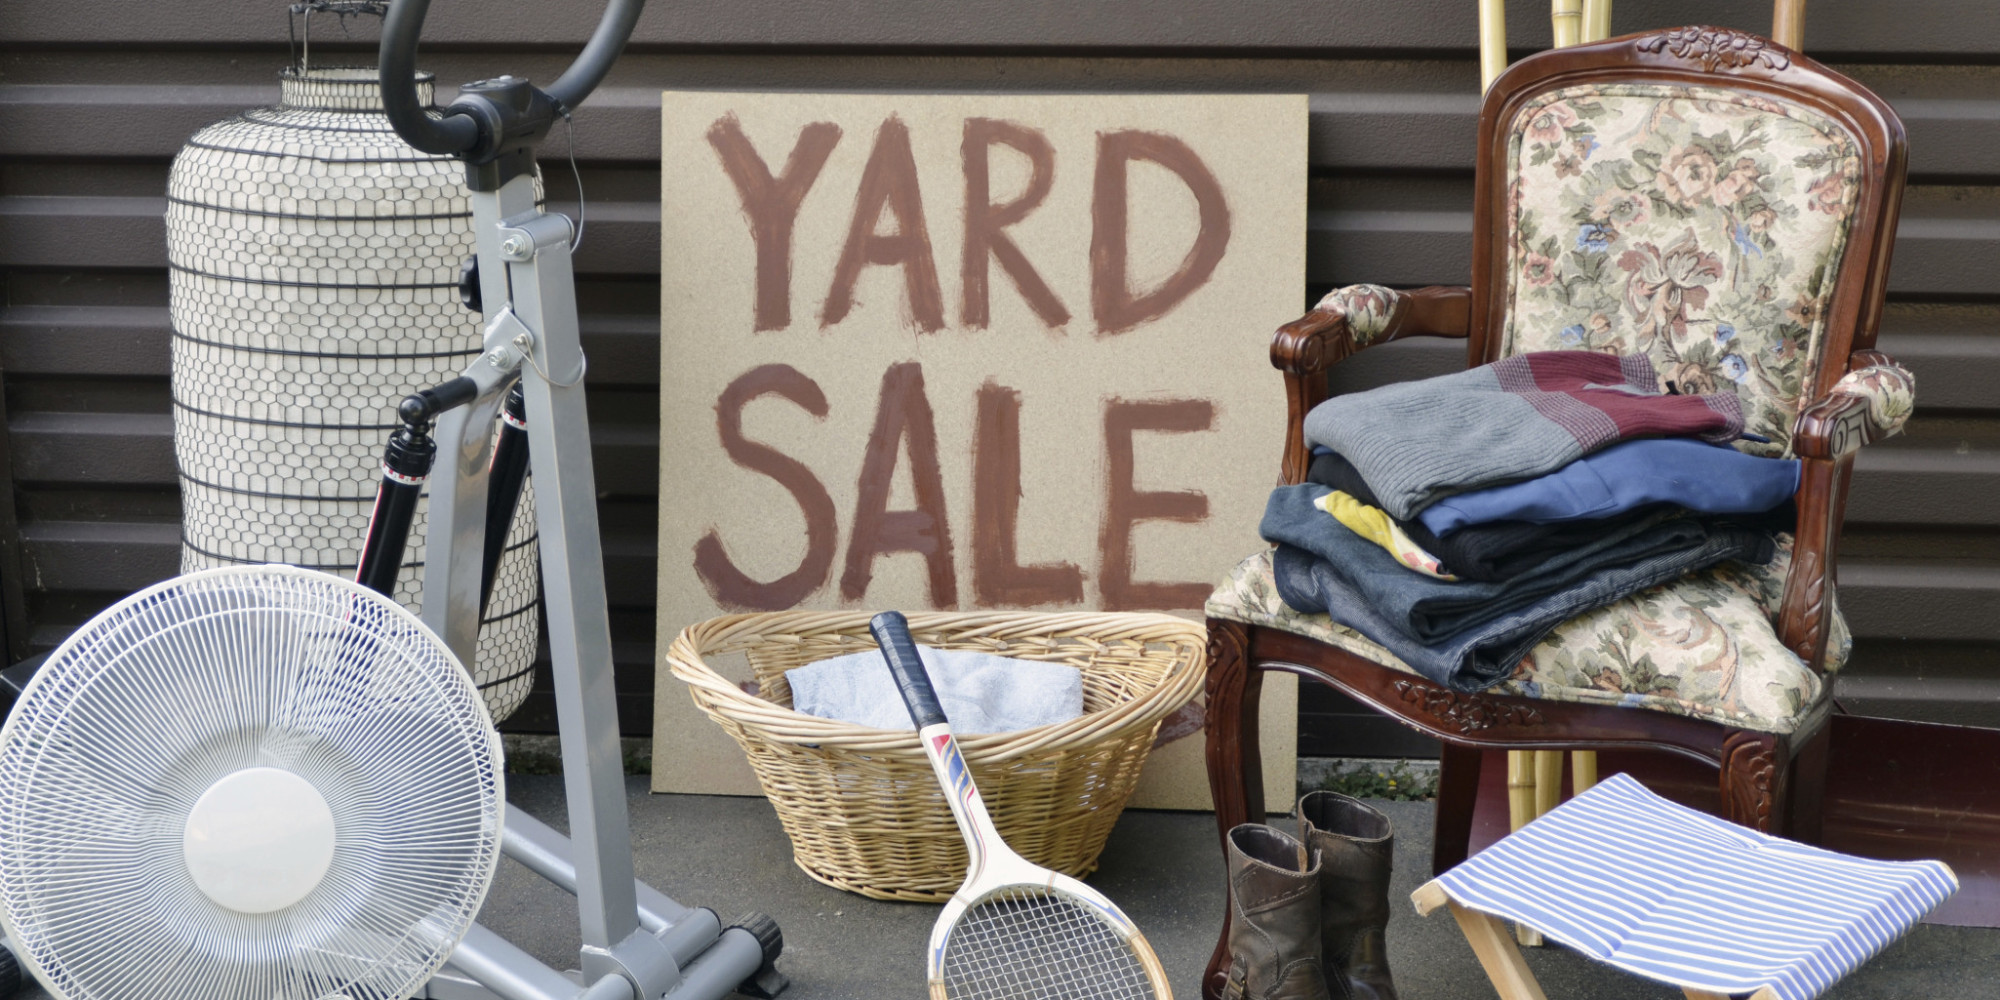 11 Things No One Will Buy At Your Yard Sale | HuffPost